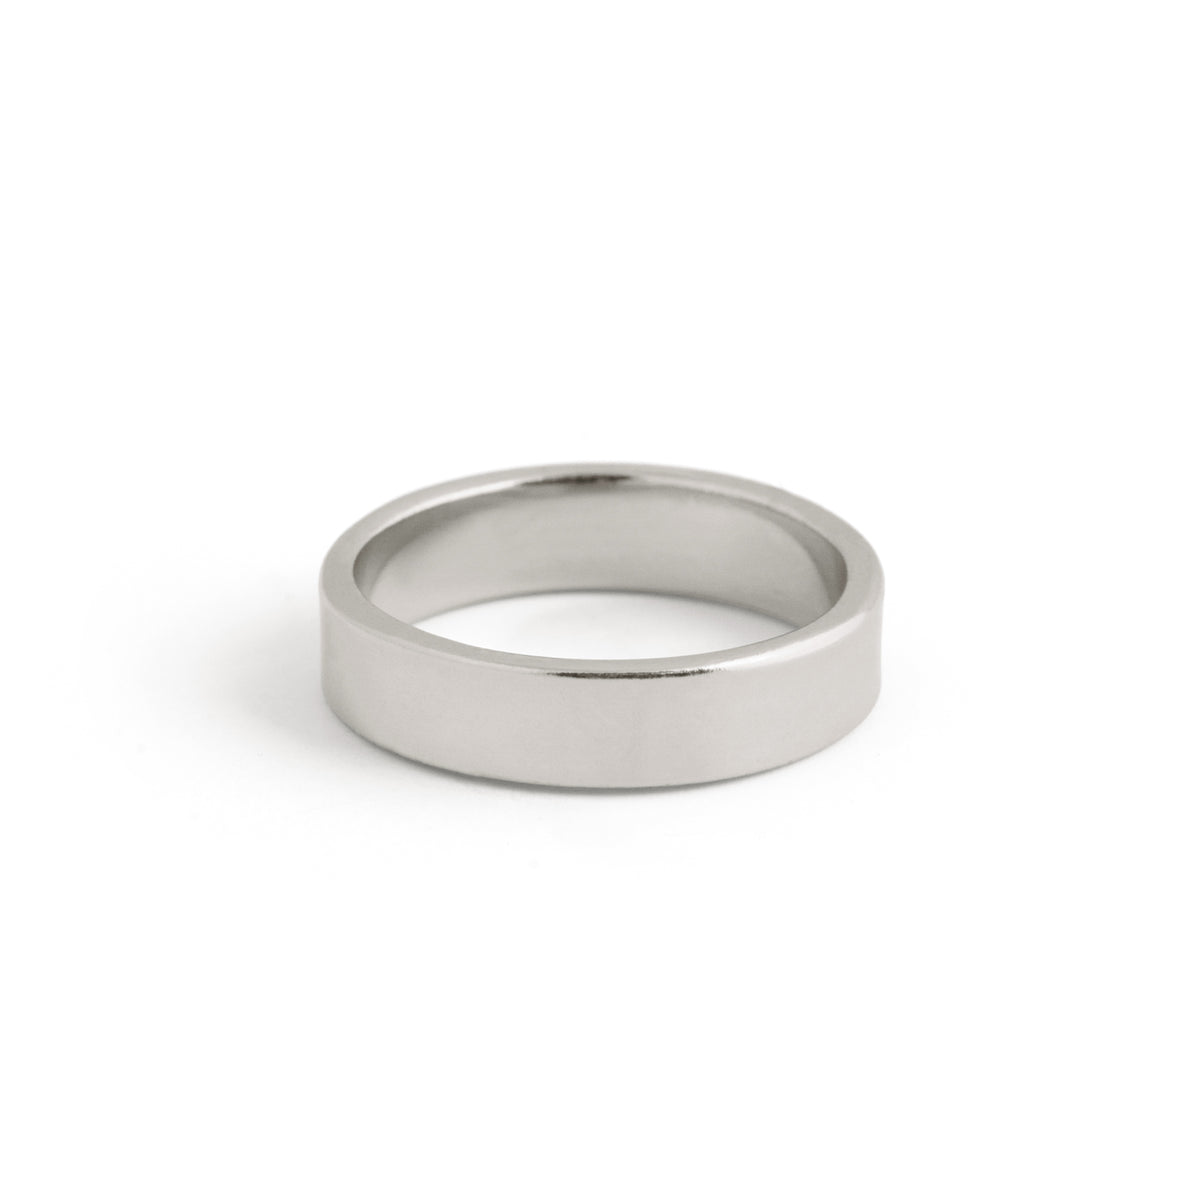 5mm Band Ring - Silver 5mm Band Ring - Silver